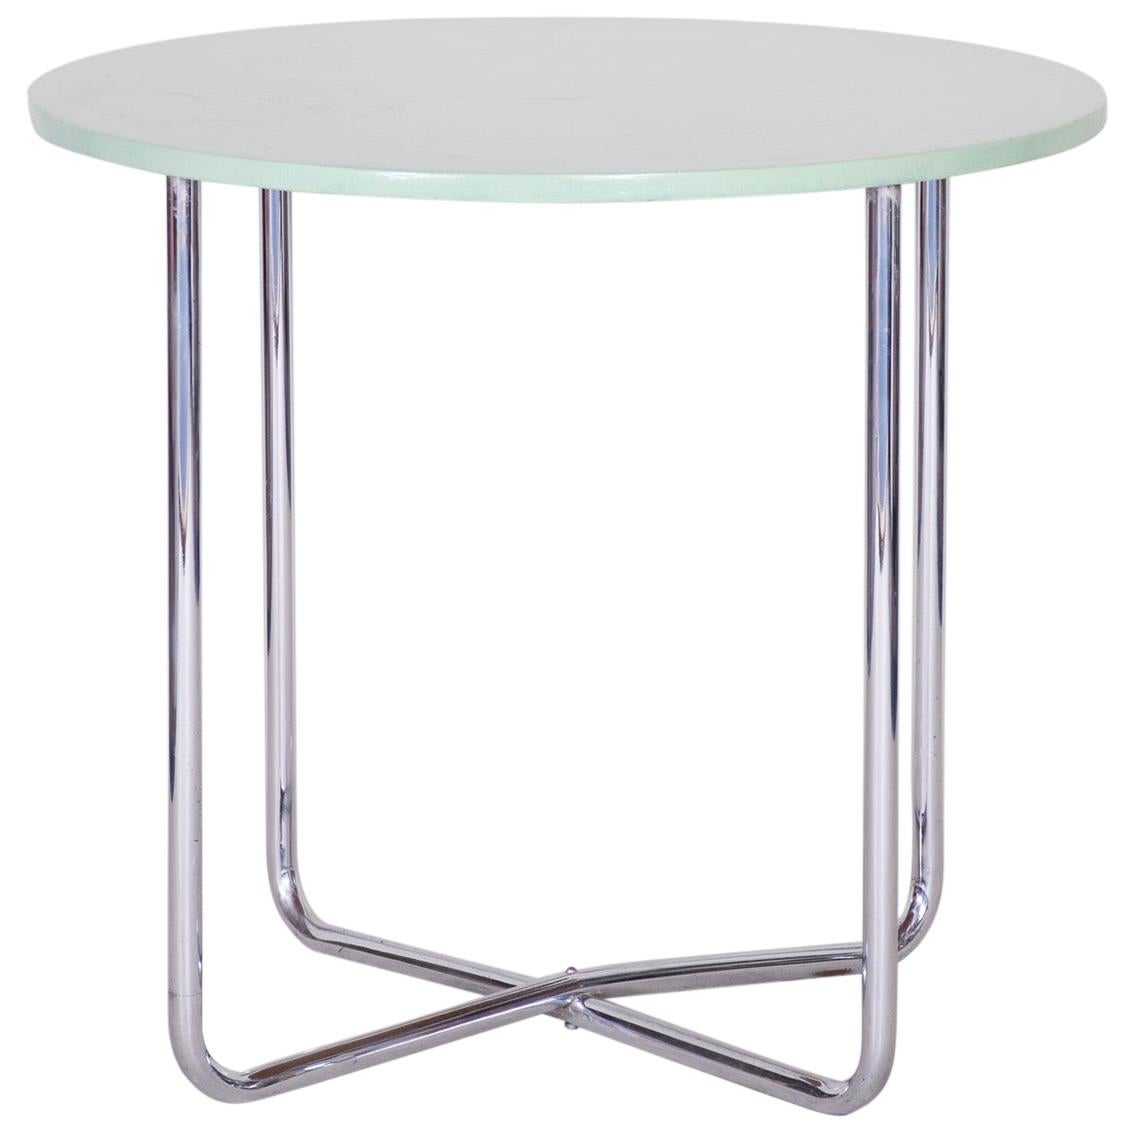 Chrome Czech Bauhaus Green Rounded Table, 1930s, Original Very Well Condition For Sale